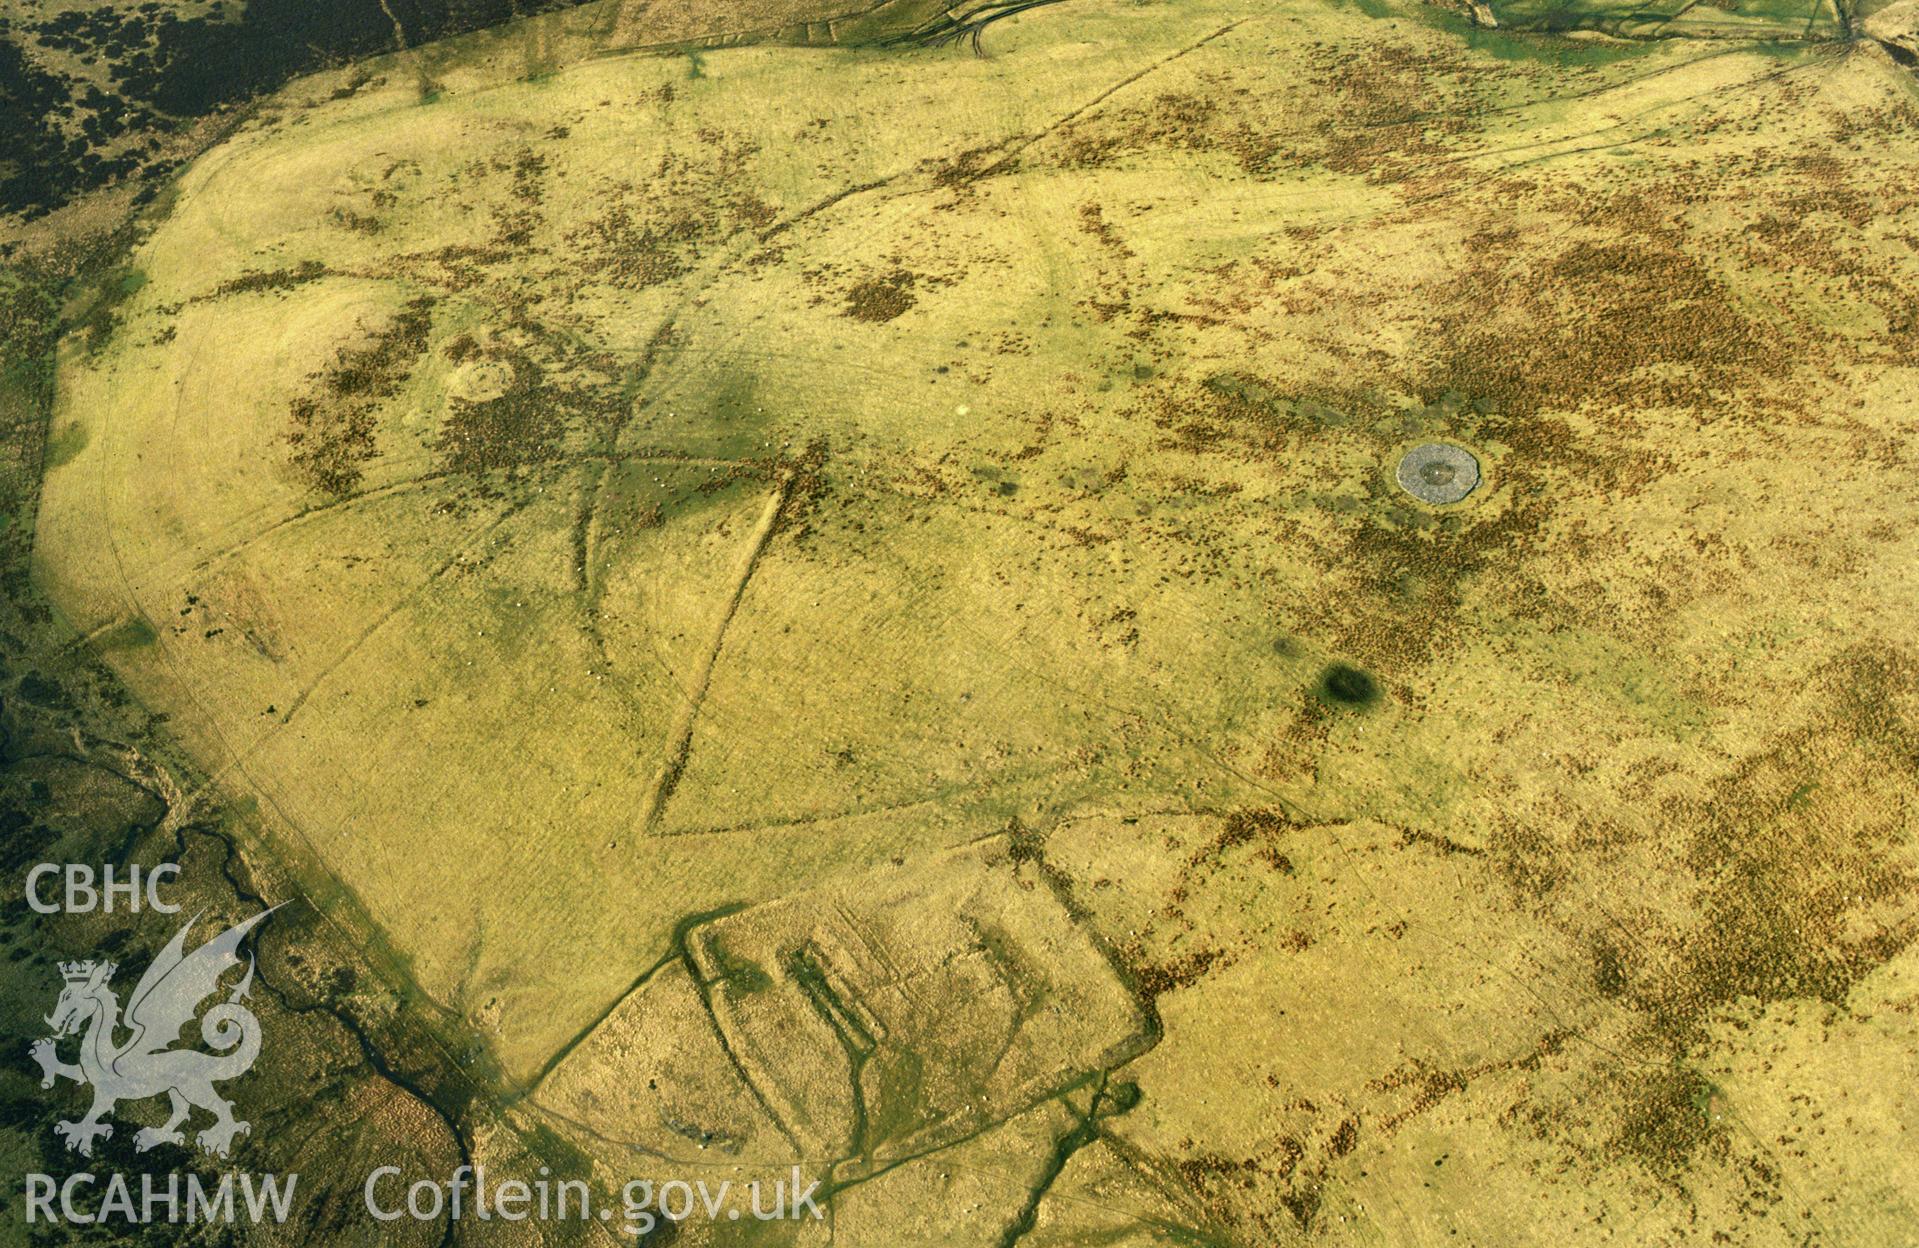 RCAHMW colour slide oblique aerial photograph of Hen Ddinbych, Llanrhaeadr-yng-nghinmeirch, taken on 26/02/1991 by CR Musson